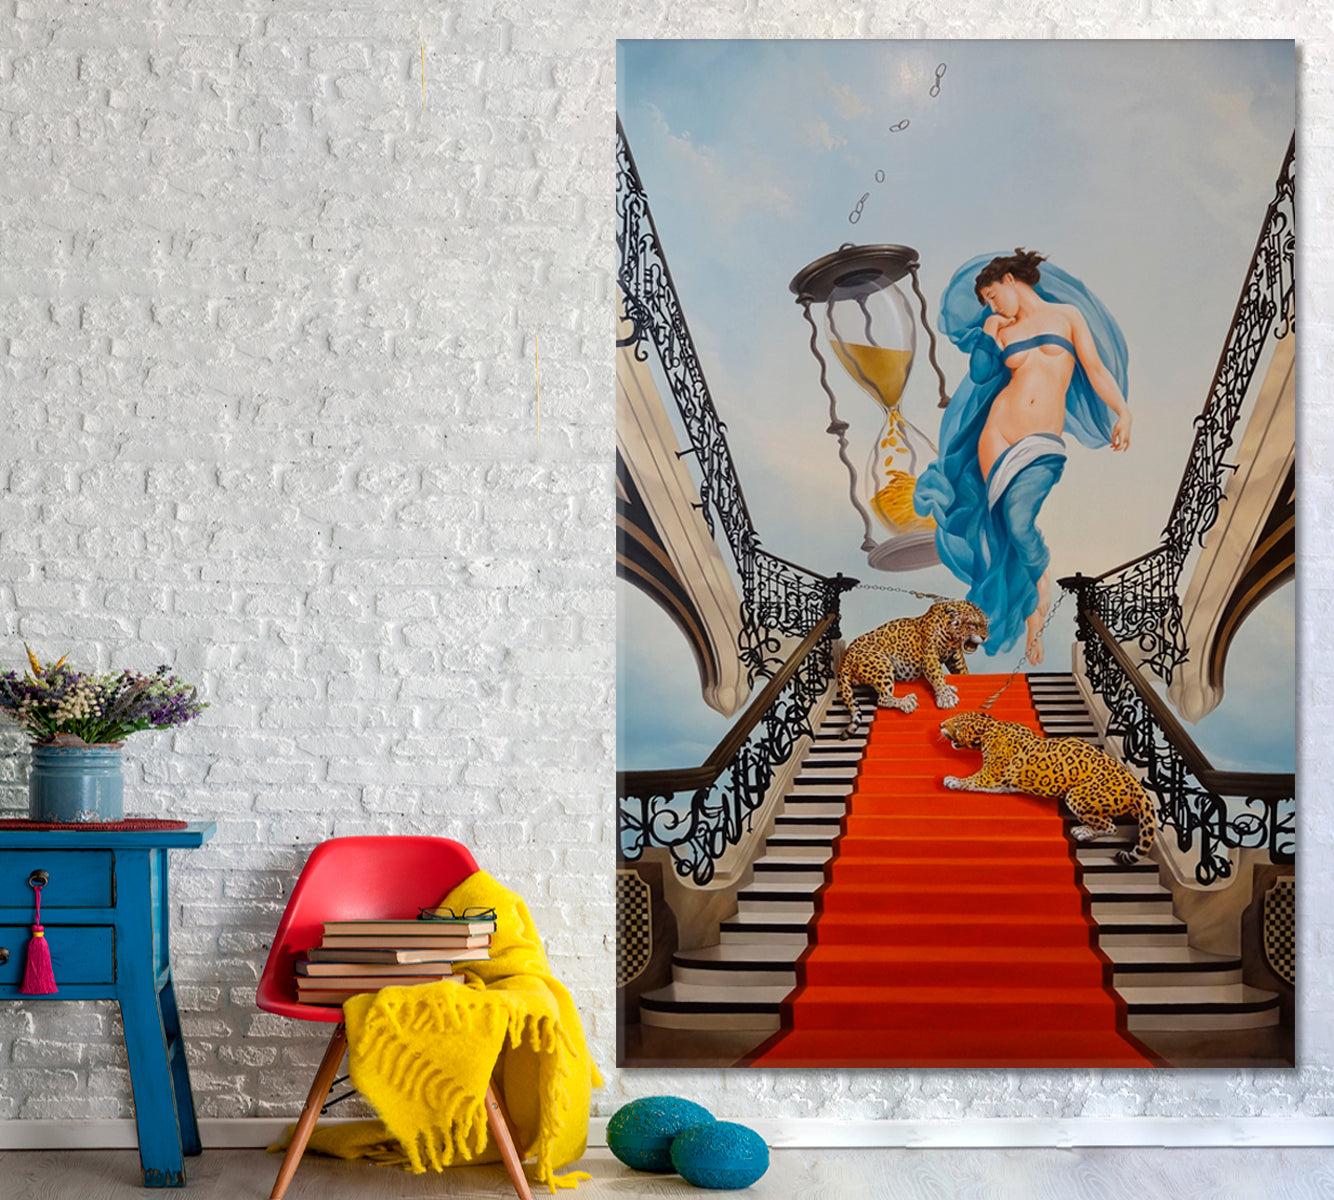 Stairway to Heaven Surrealism Art Dali Style  | Vertical Surreal Fantasy Large Art Print Décor Artesty   